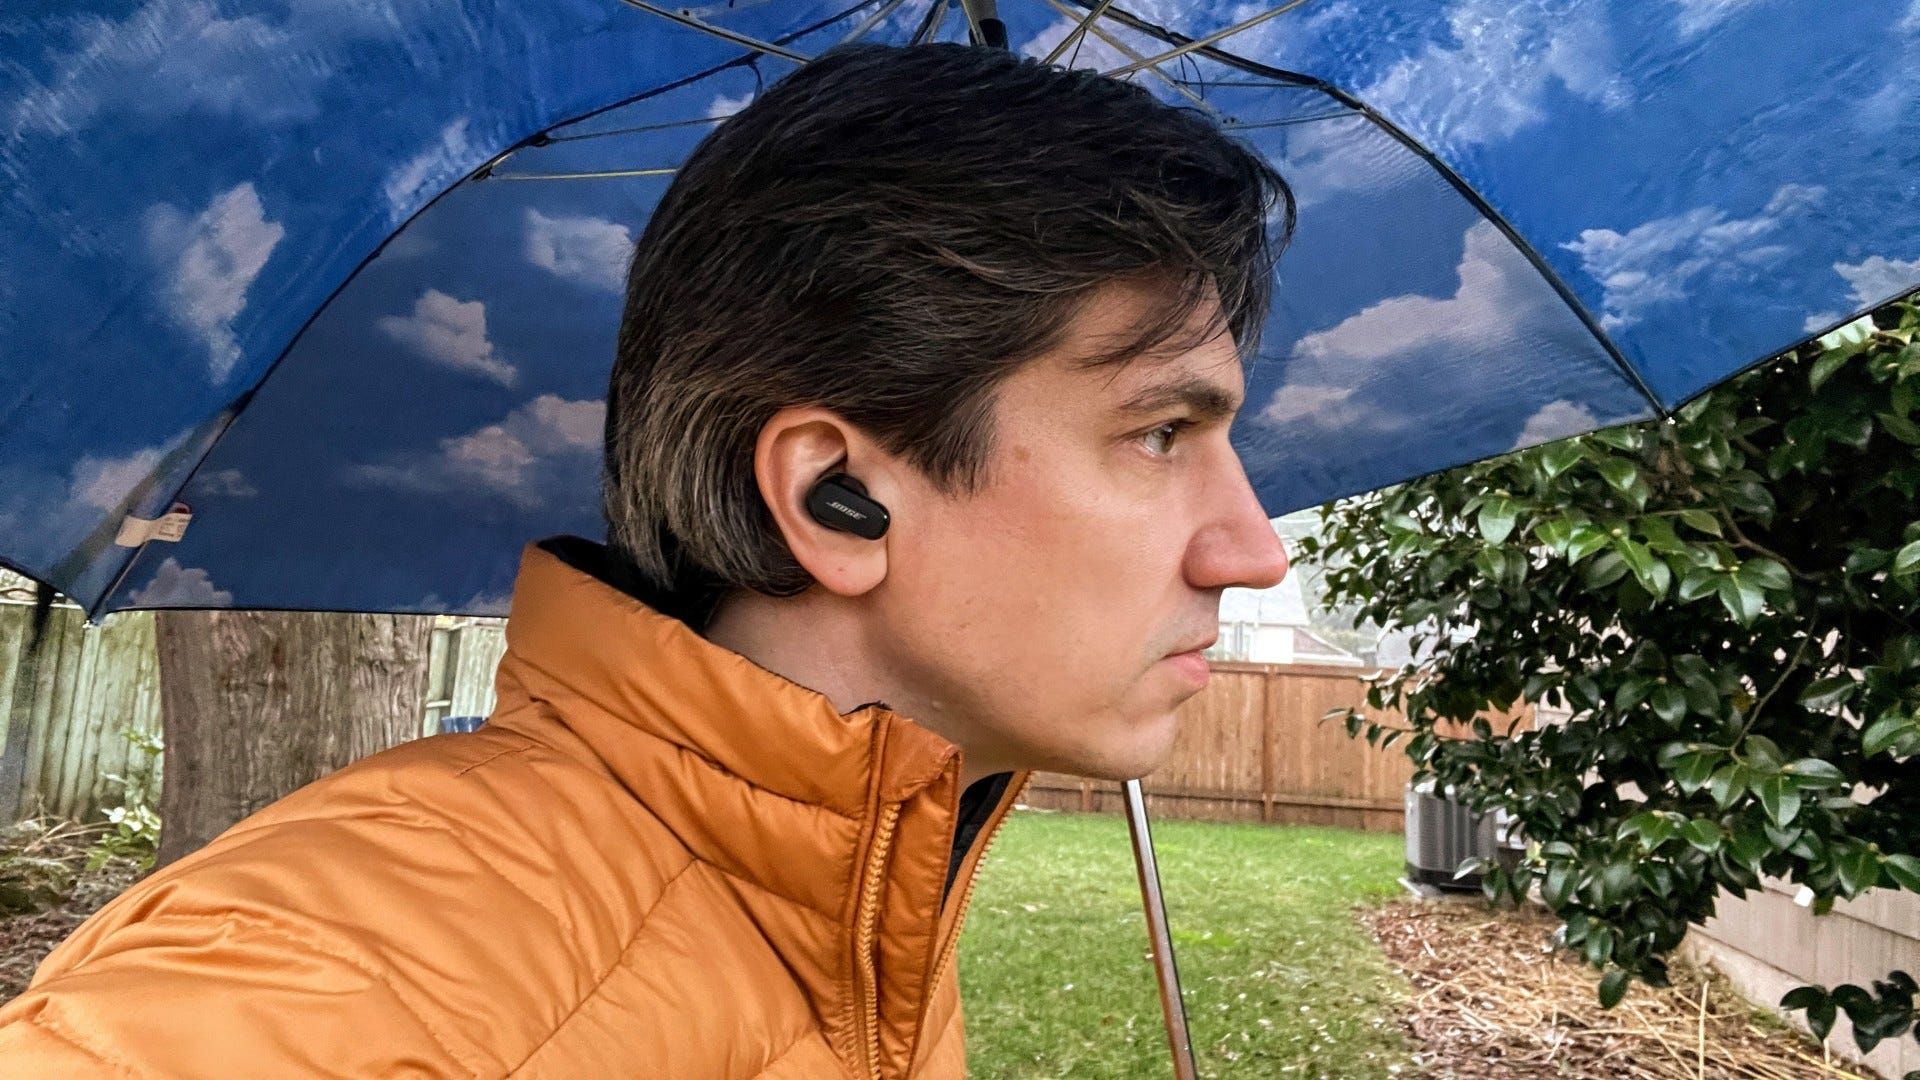 Man Listening to Bose QuietComfort 2 earbuds in yard with gold jacket